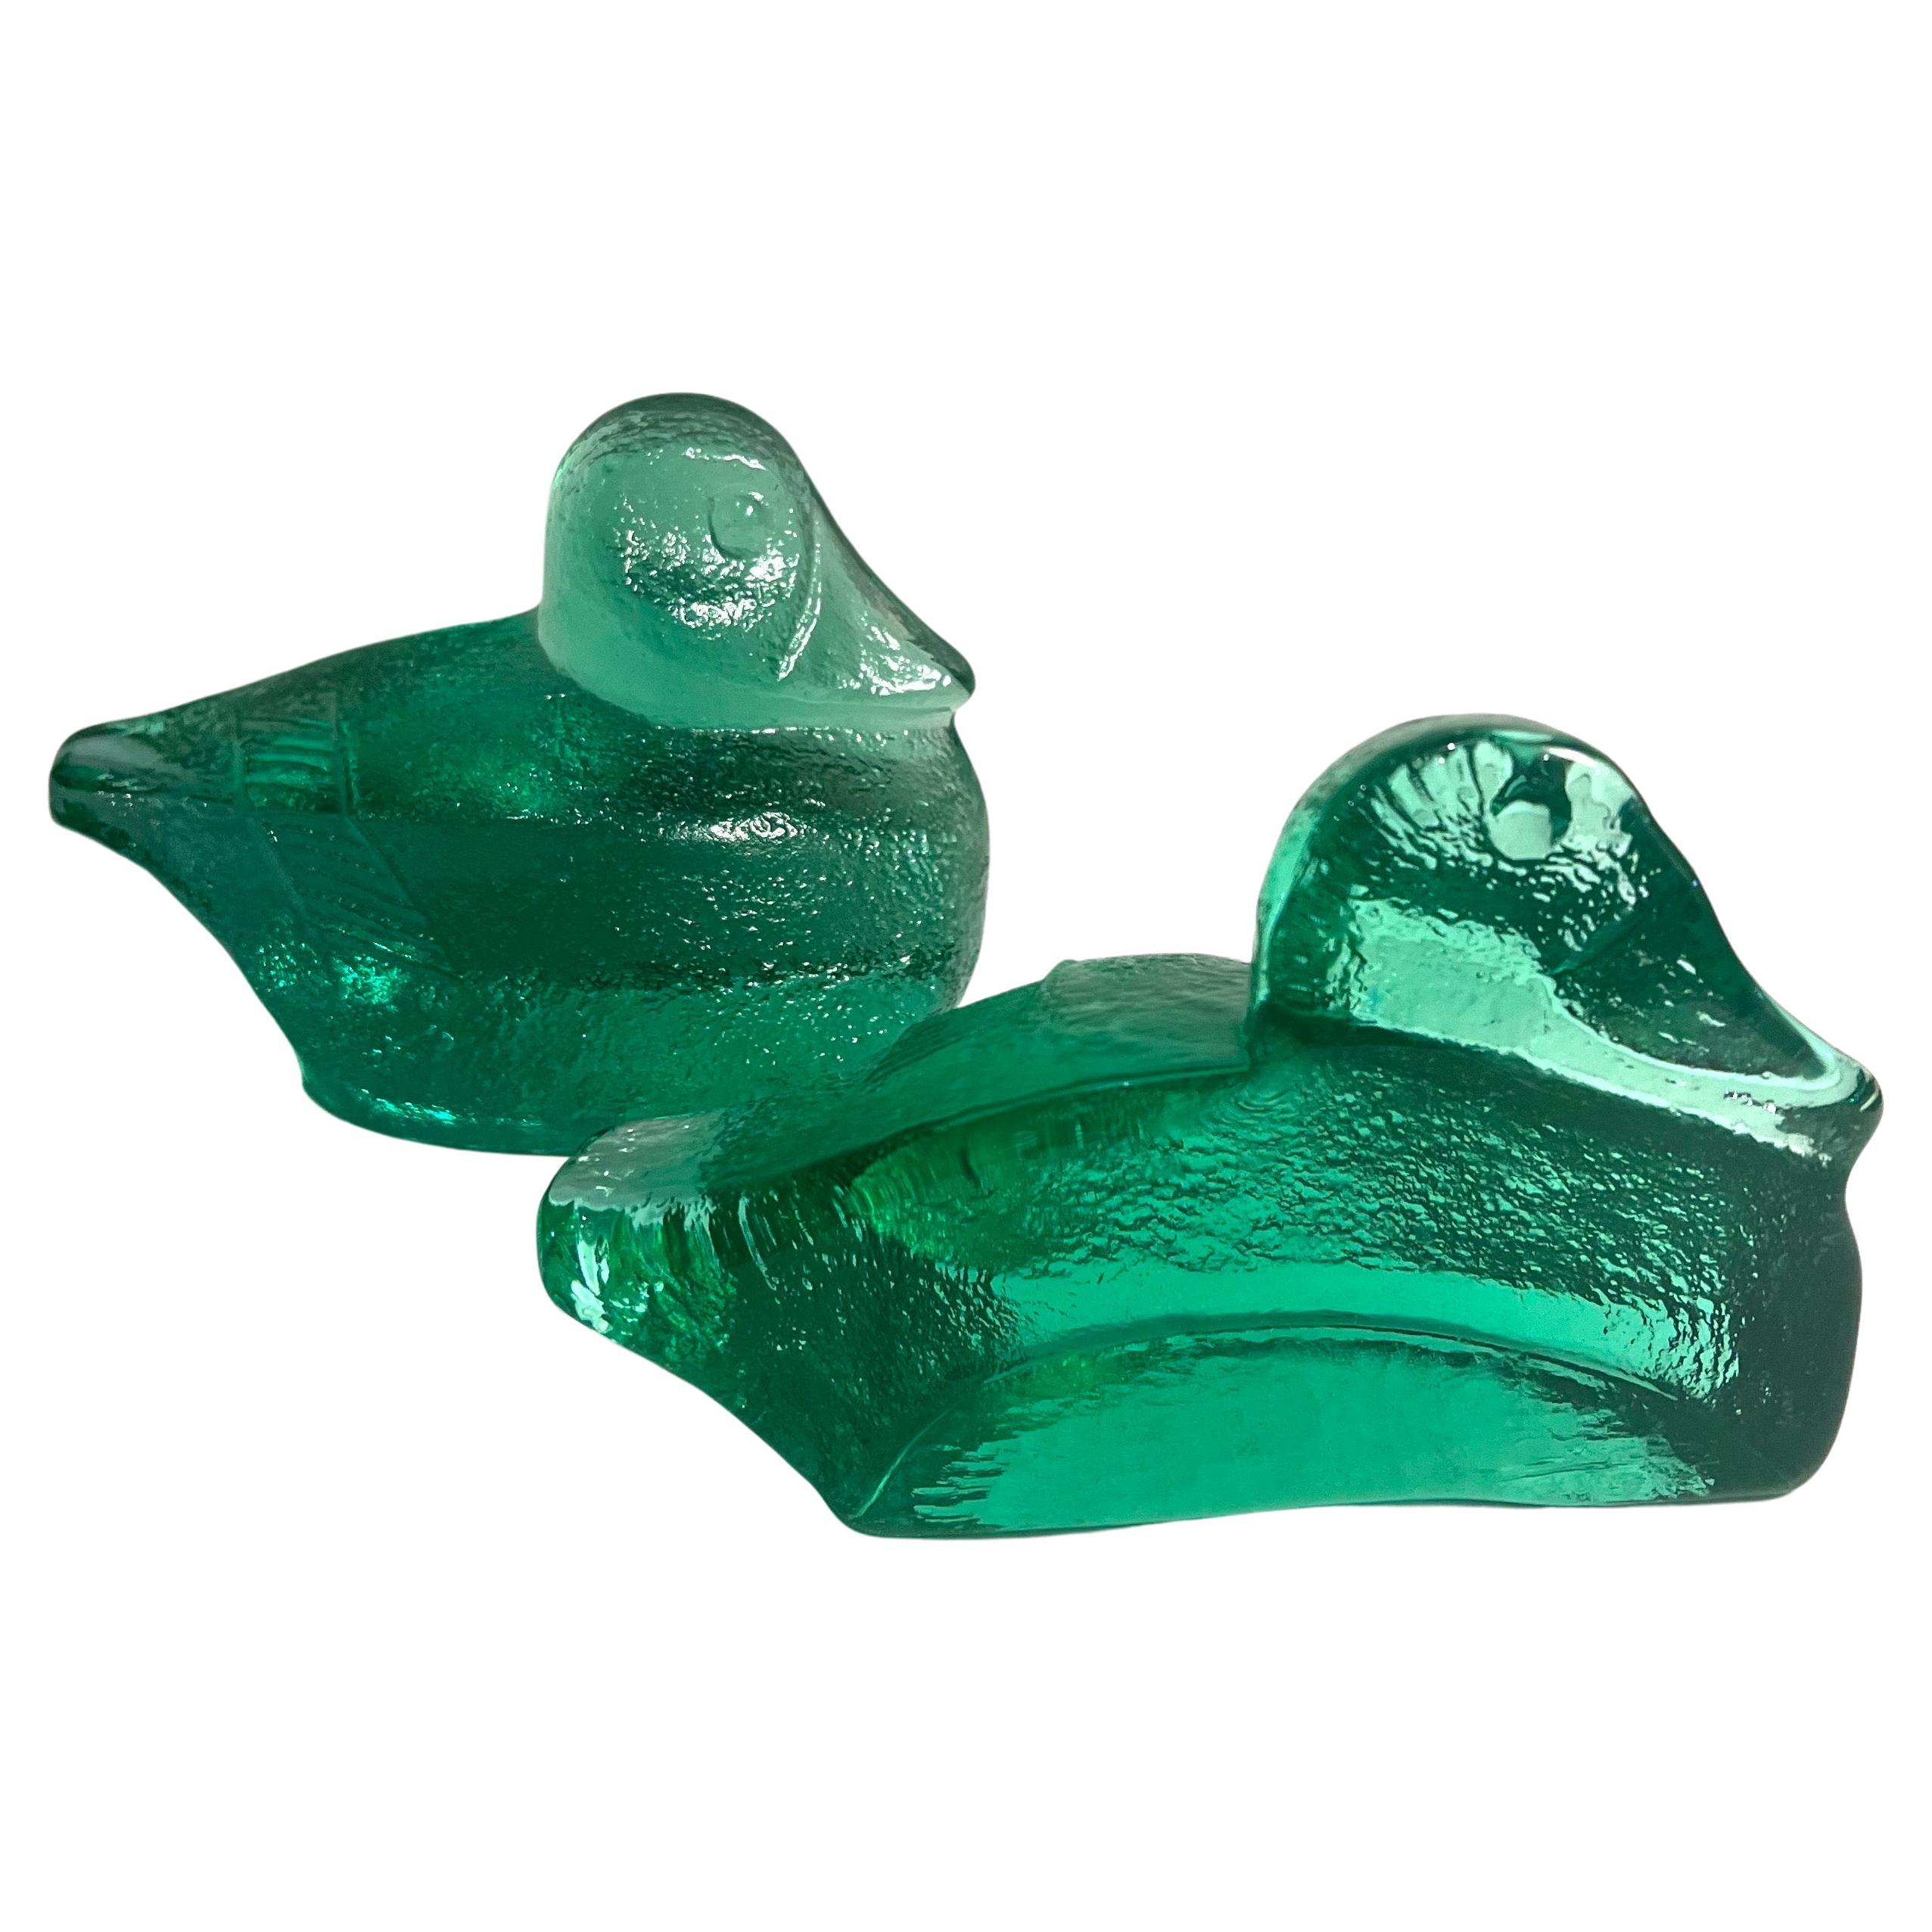 Mid-Century Modern Pair of Rare Emerald Green Glass Bookends by Blenko For Sale